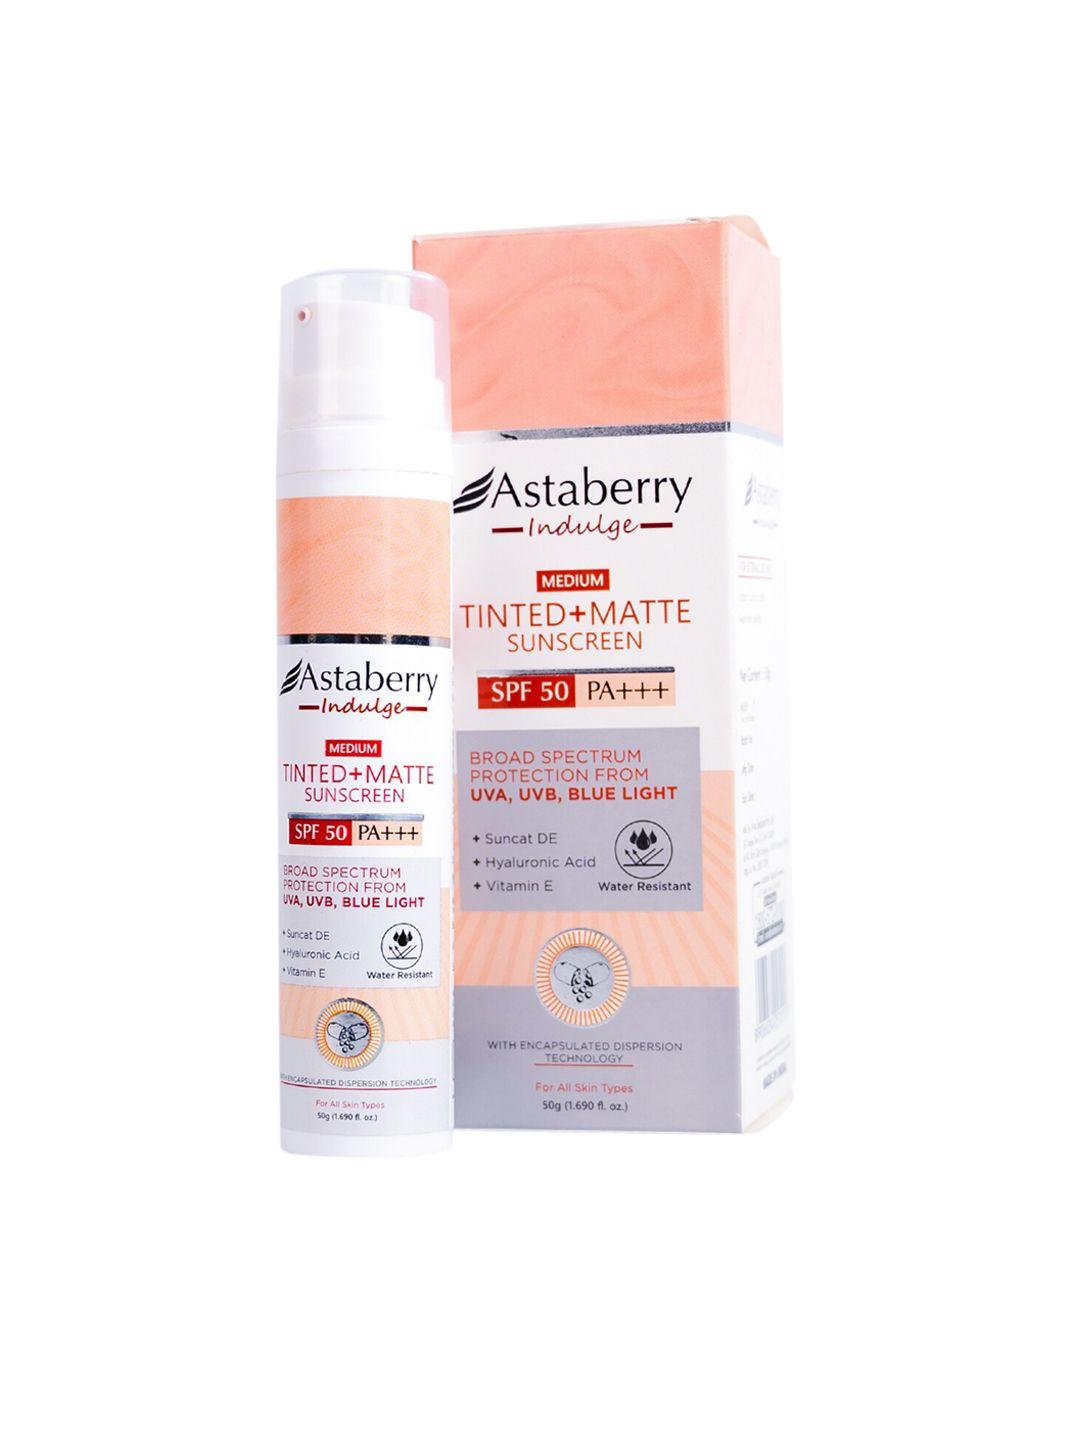 astaberry indulge tinted matte sunscreen spf 50 pa+++ for broad spectrum- 50g